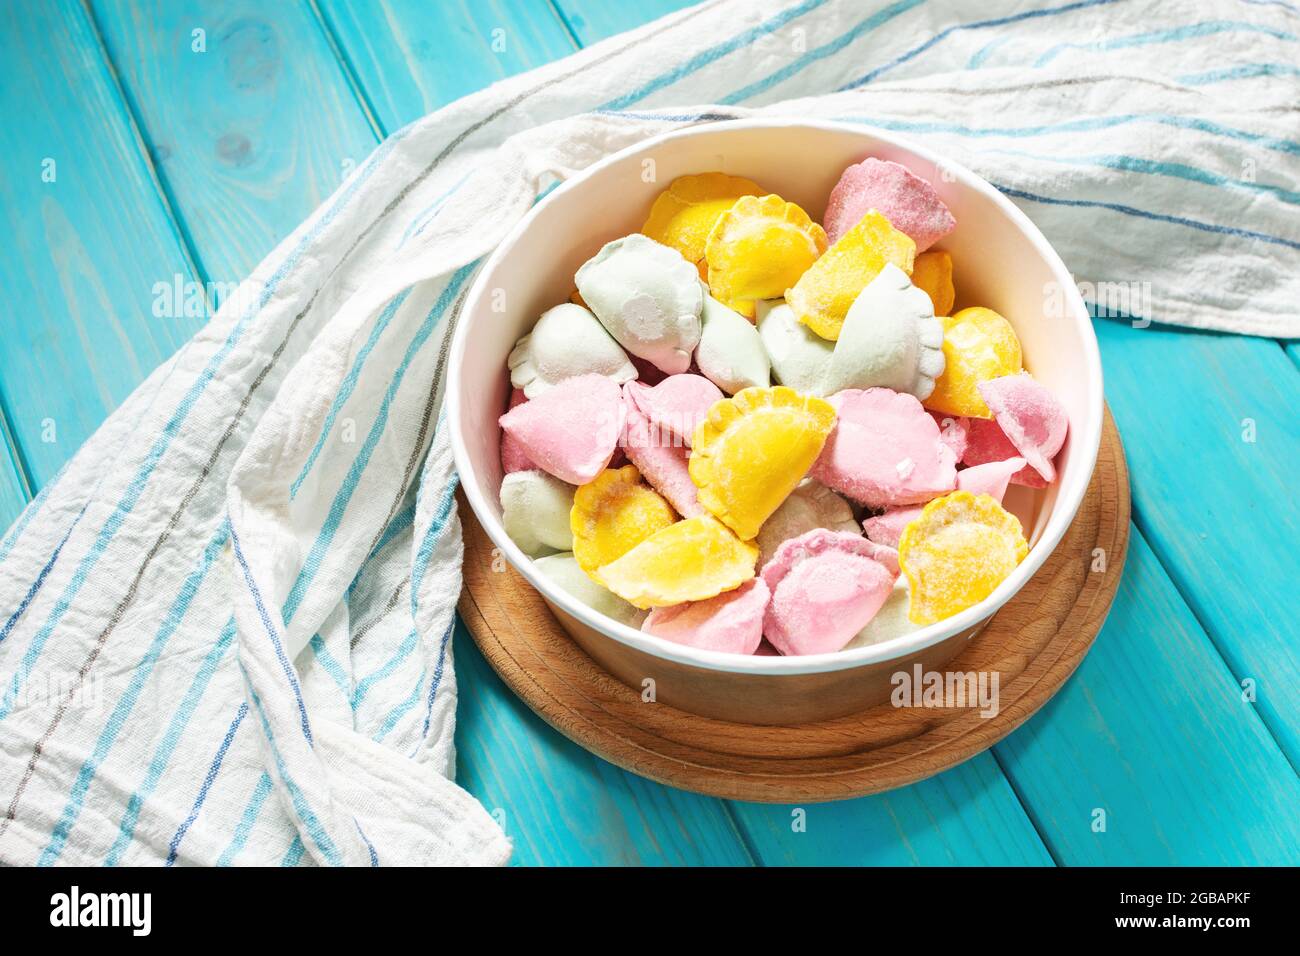 Multi colored dumplings from color dough stuffed with meat on a blue wooden background Stock Photo